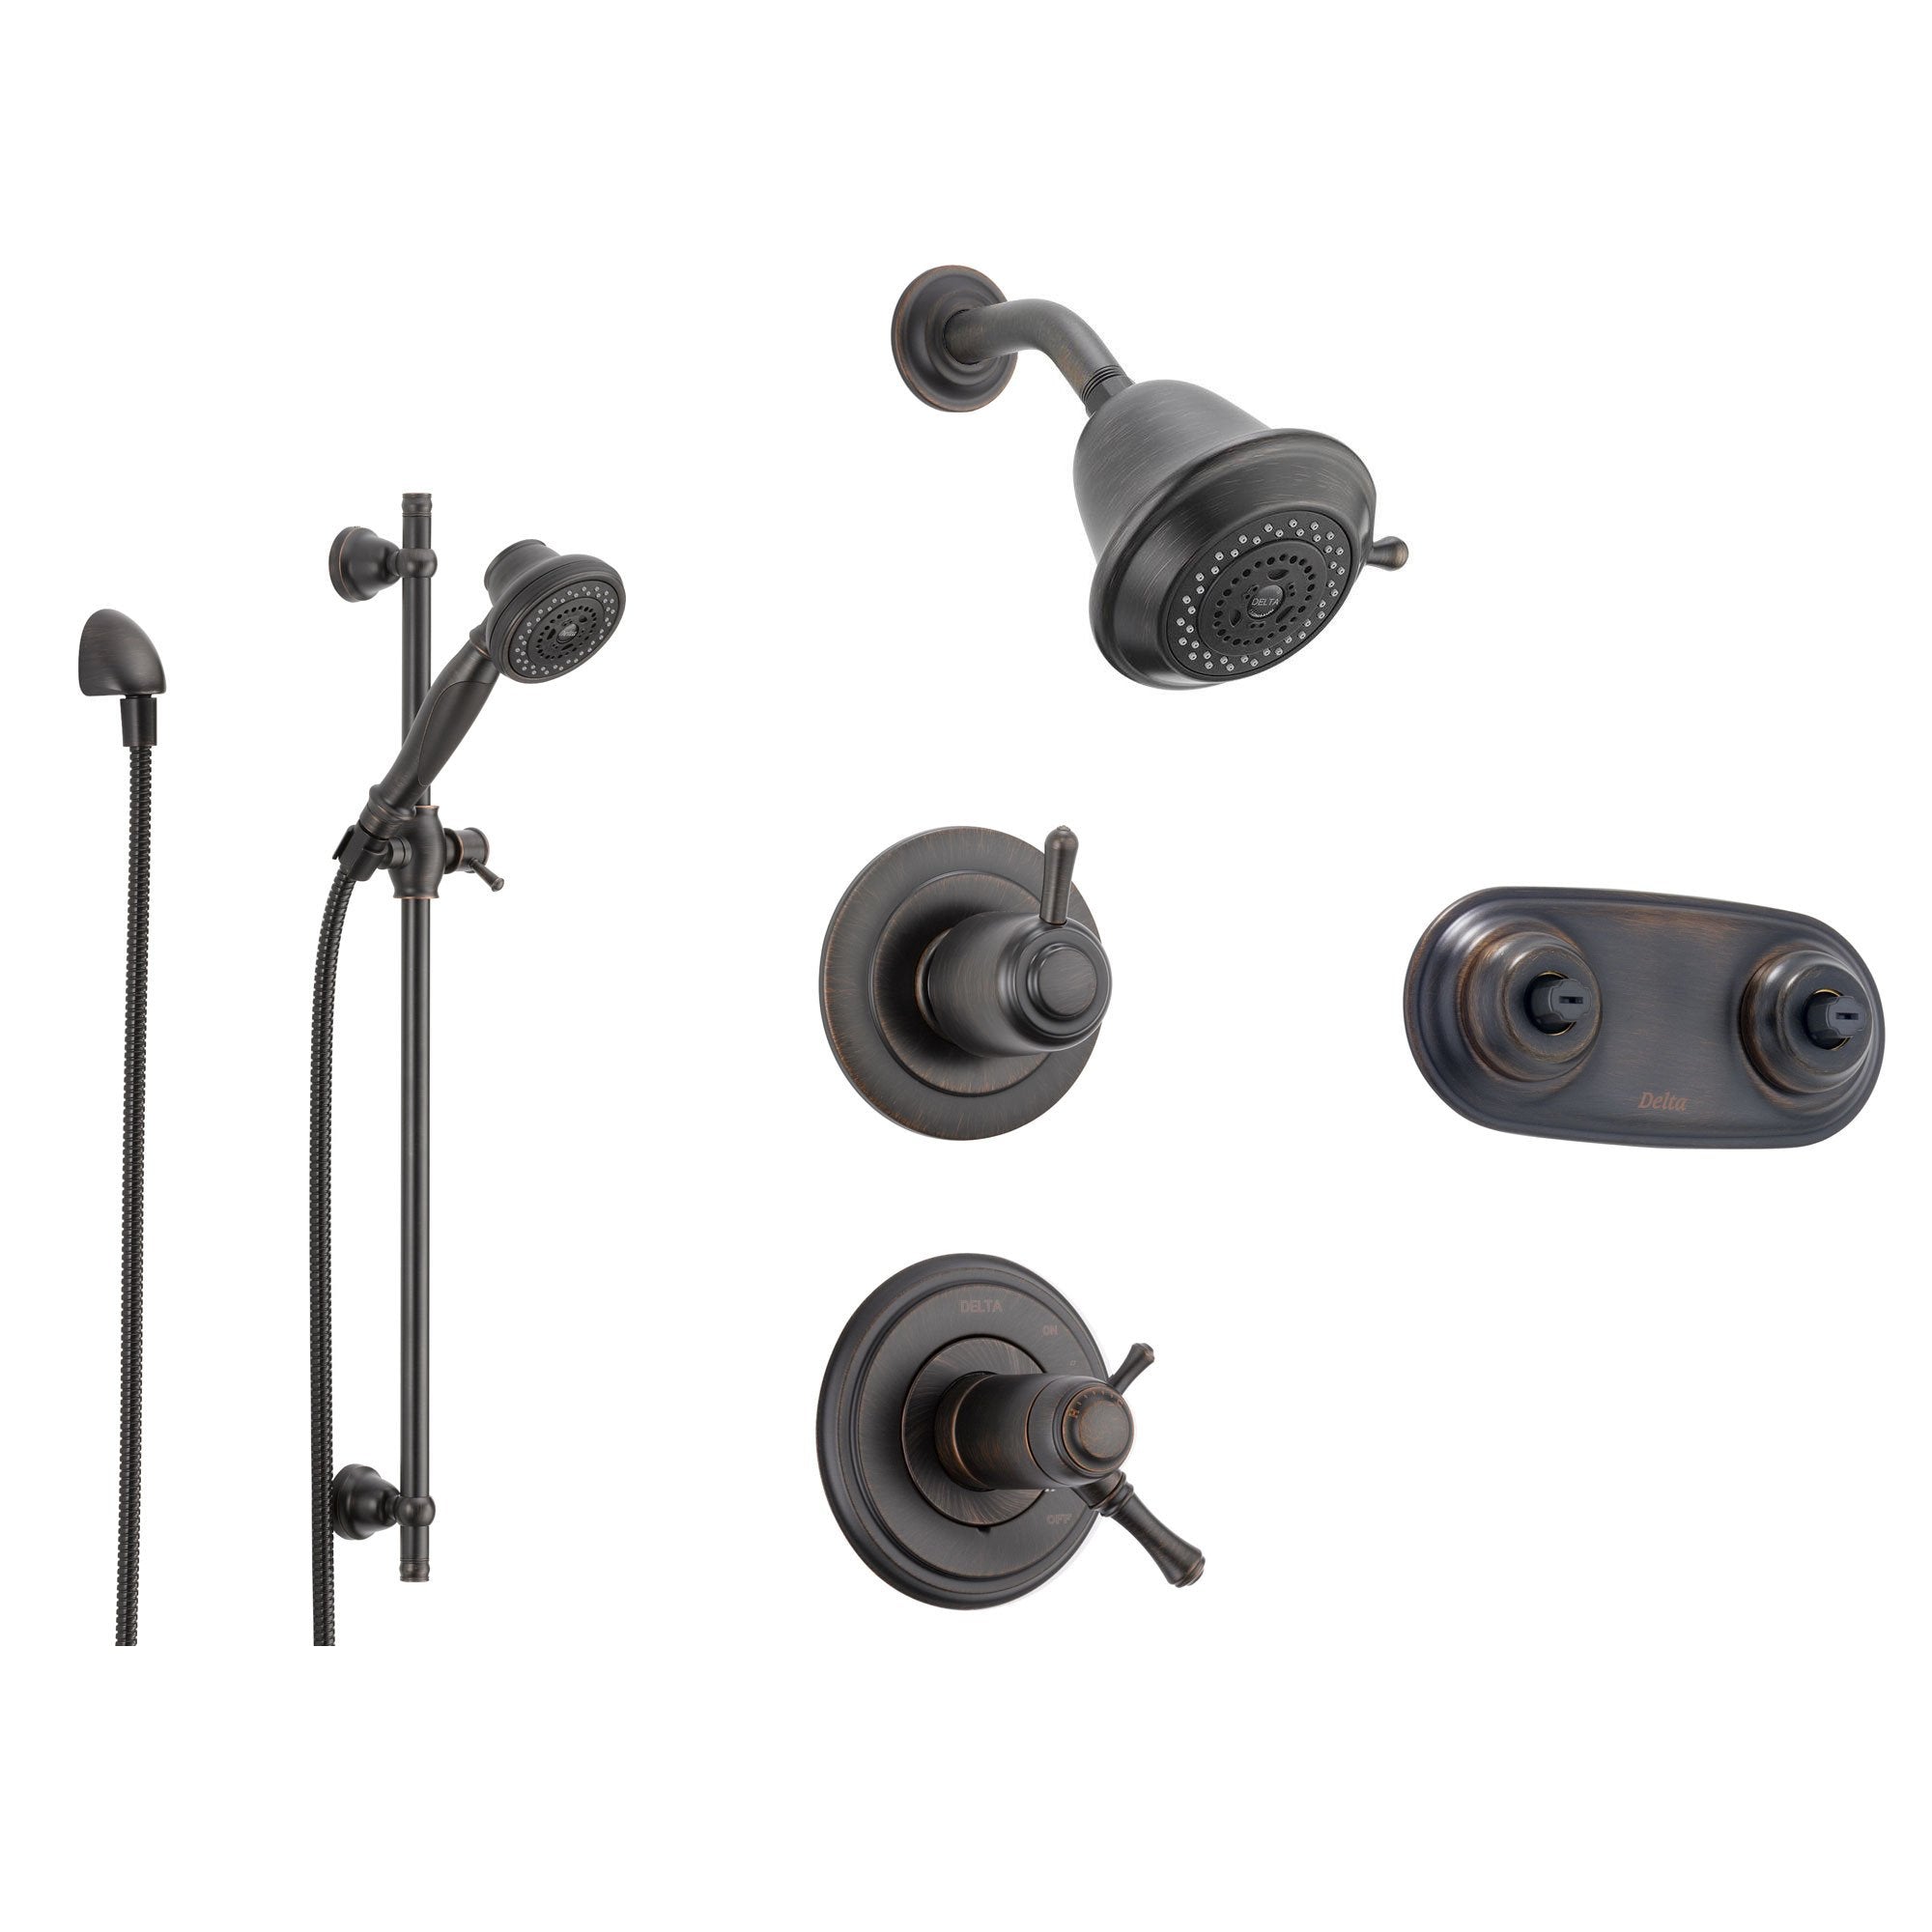 Delta Cassidy Venetian Bronze Shower System with Thermostatic Shower Handle, 6-setting Diverter, Showerhead, Handheld Shower Spray, and Dual Spray Shower Plate SS17T9792RB